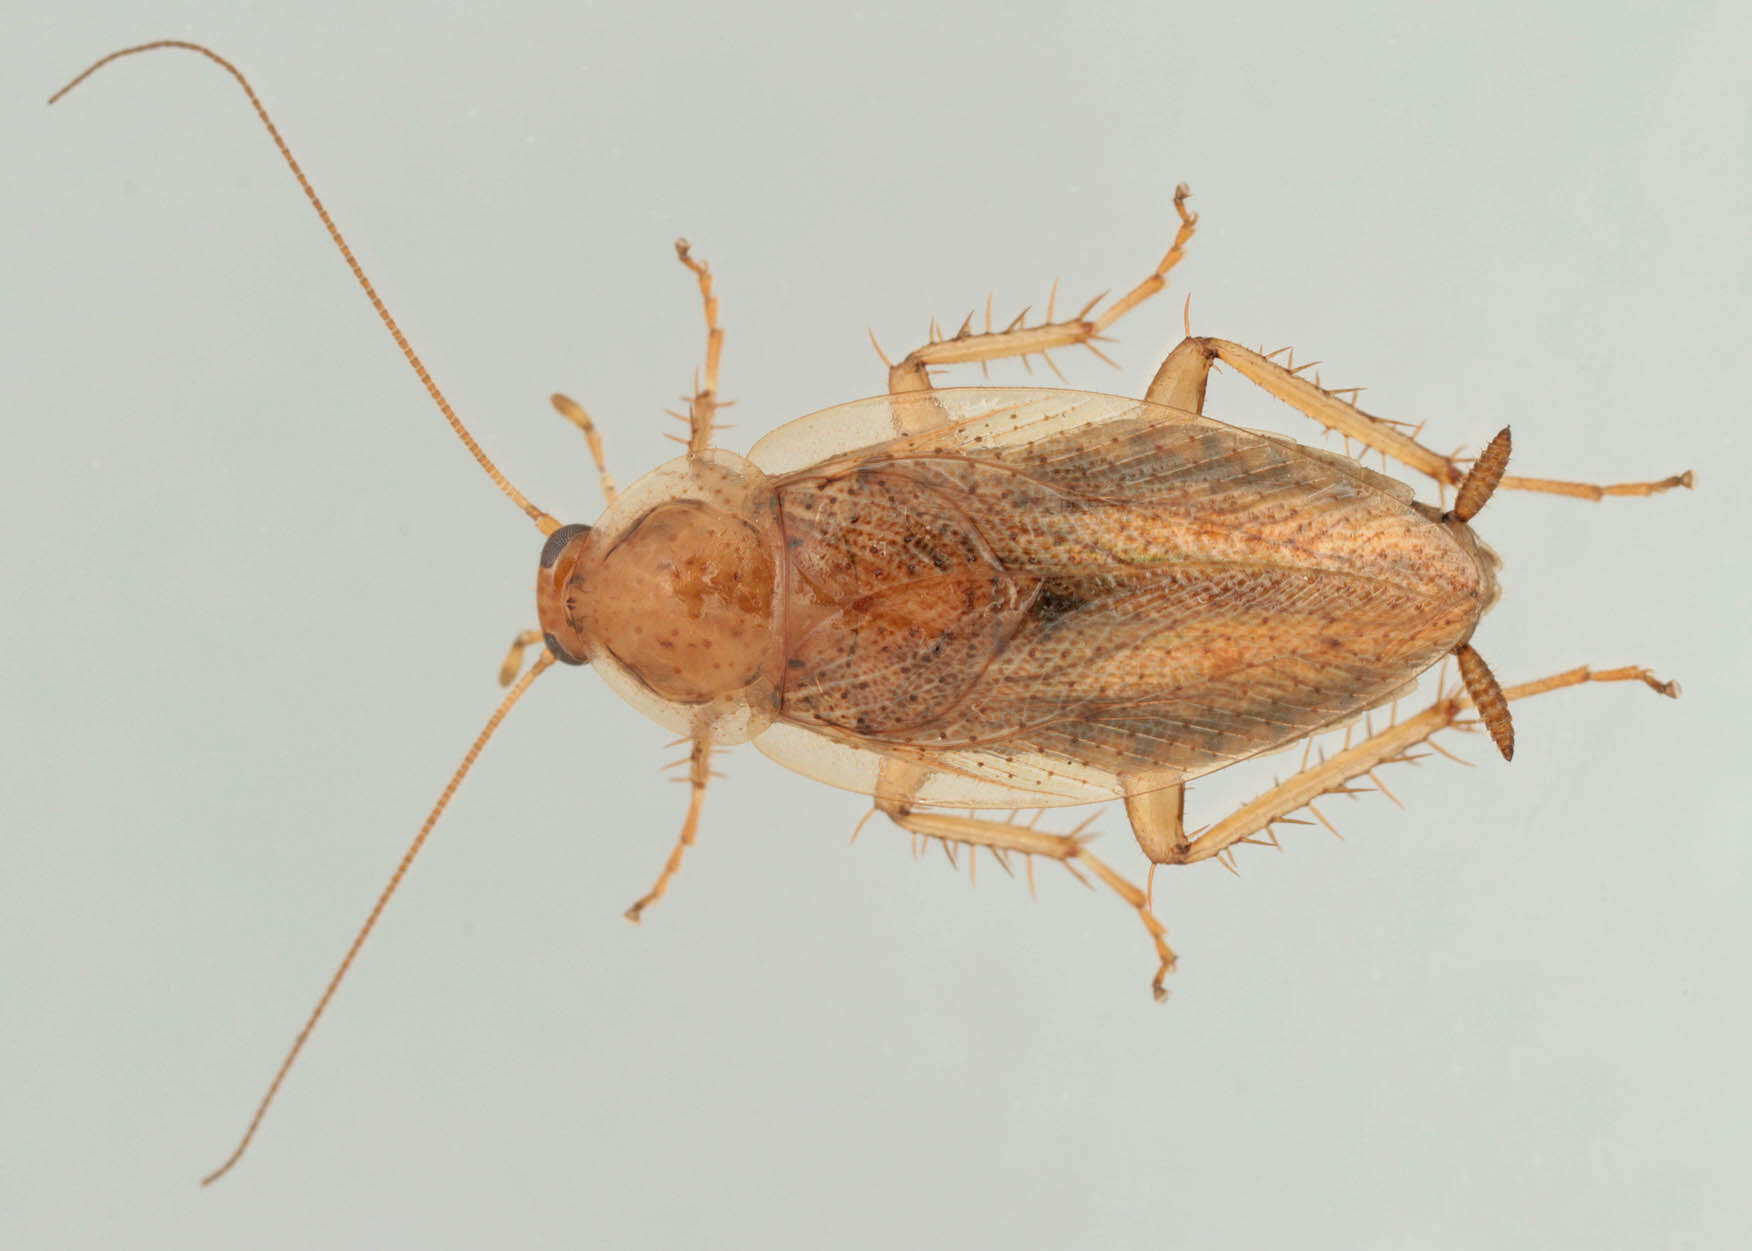 Image of tawny cockroach